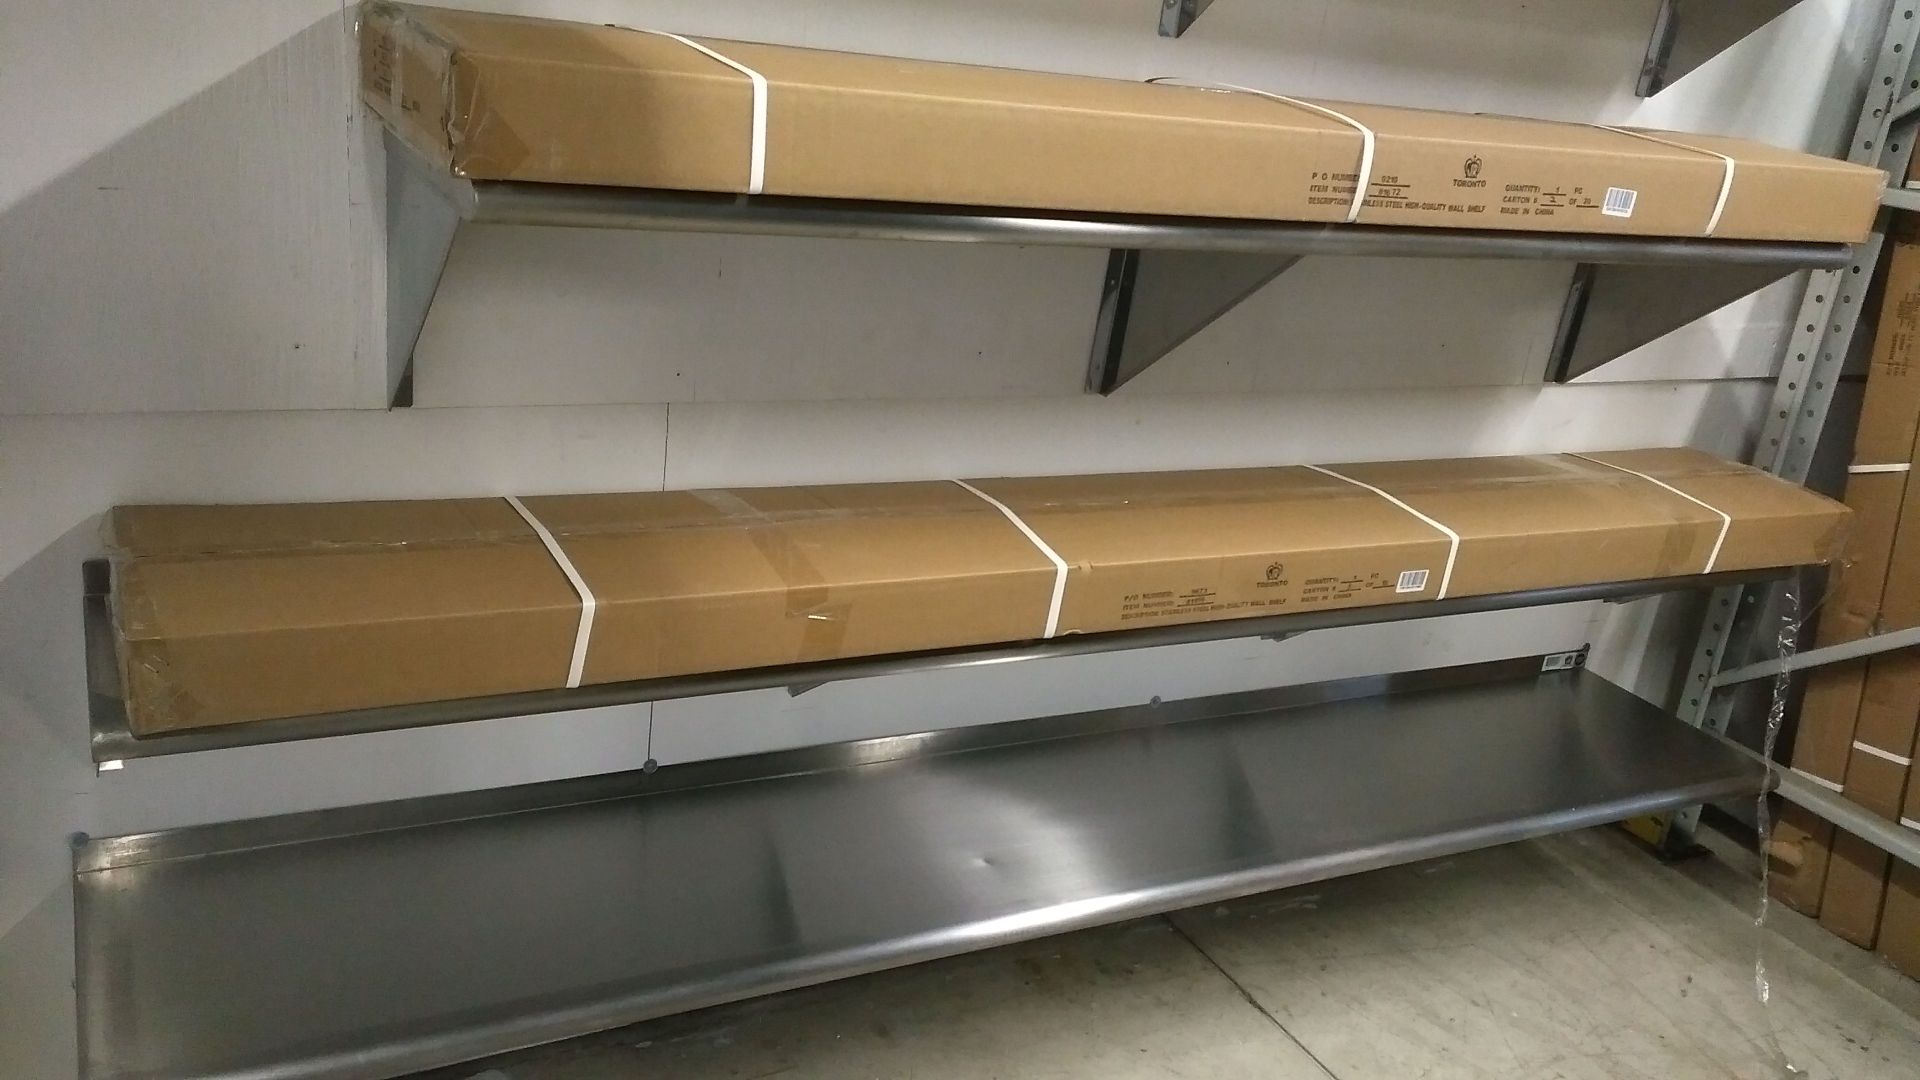 12" x 96" Stainless Wall Shelves - Lot of 2